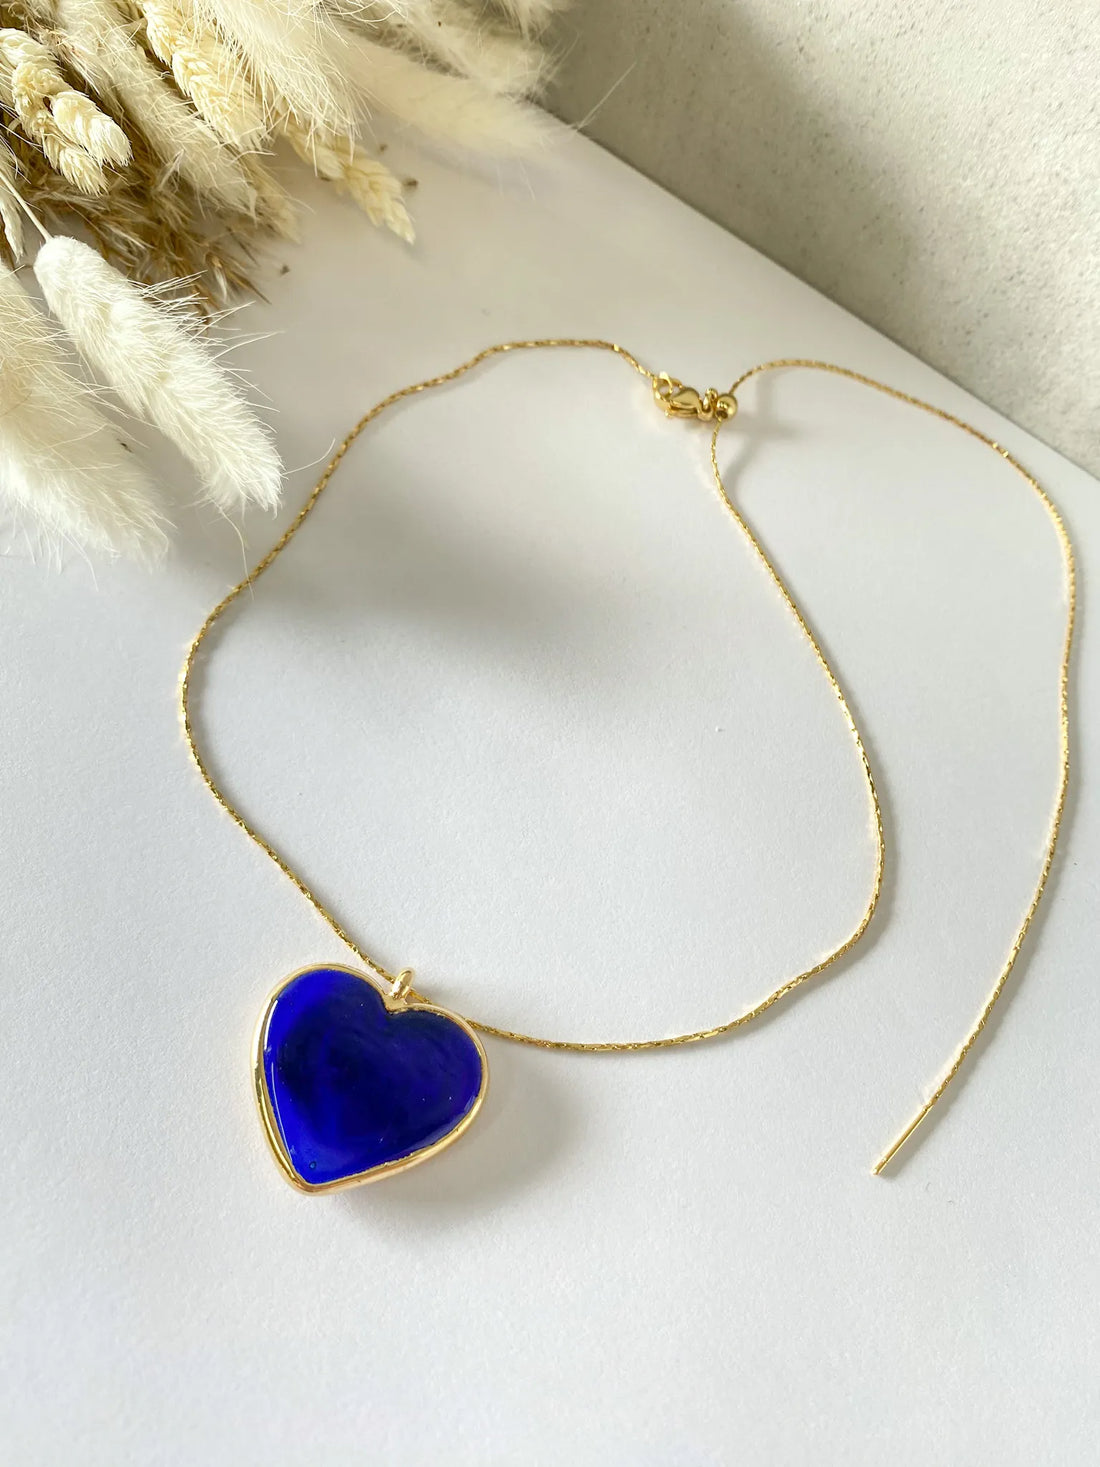 Blue Crystal Heart Necklace.